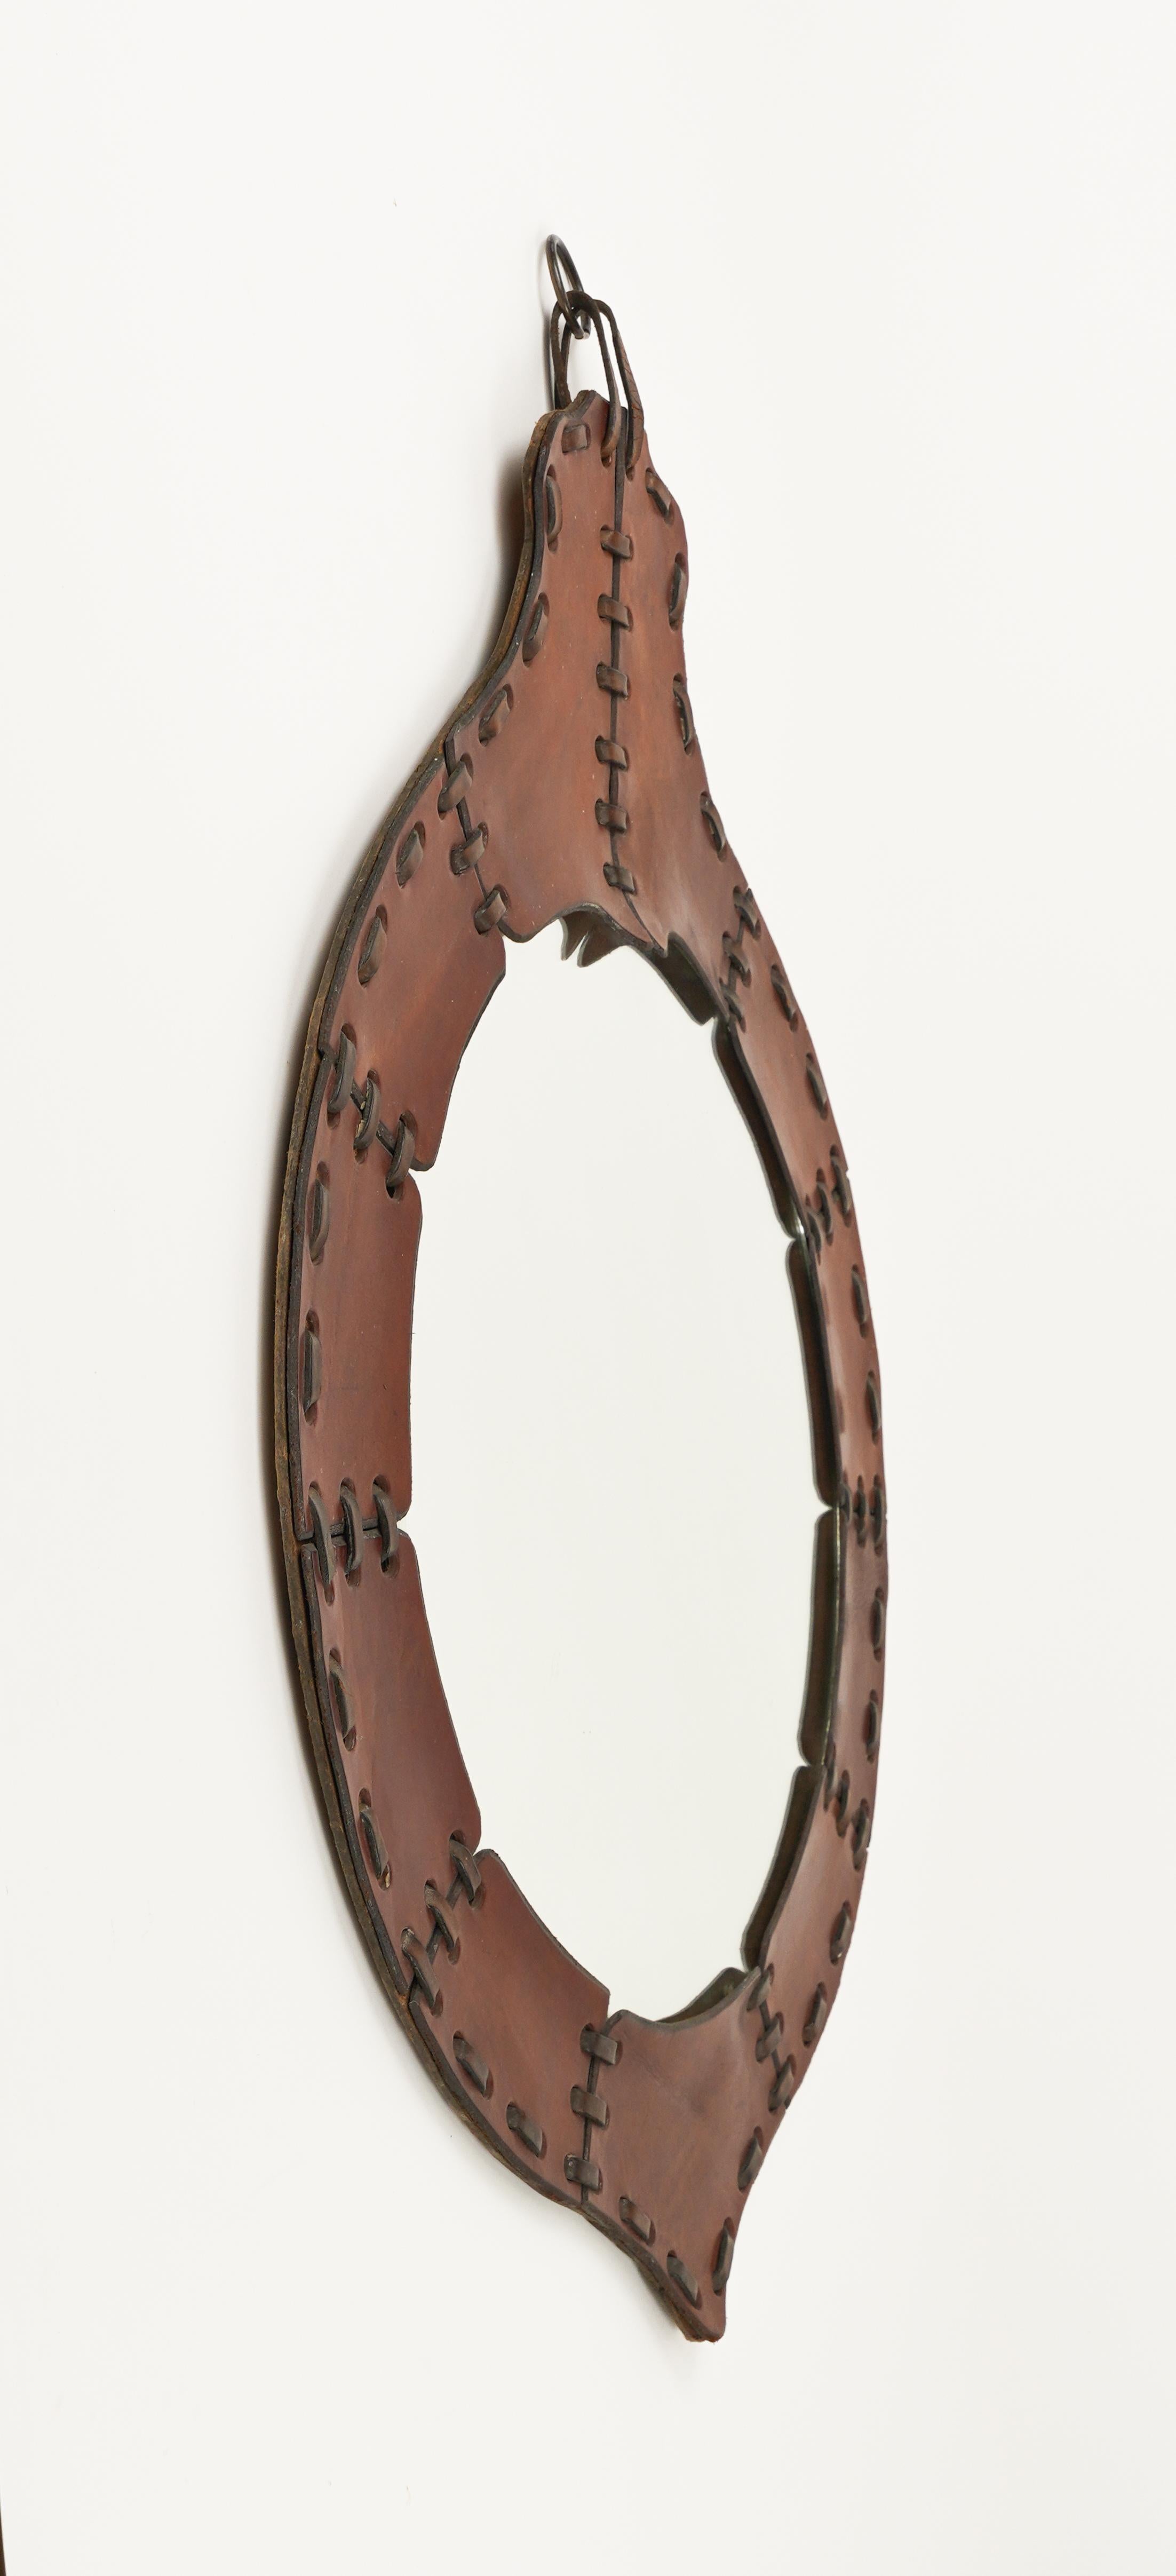 Italian Midcentury Teardrop Wall Mirror in Leather, Italy 1960s For Sale